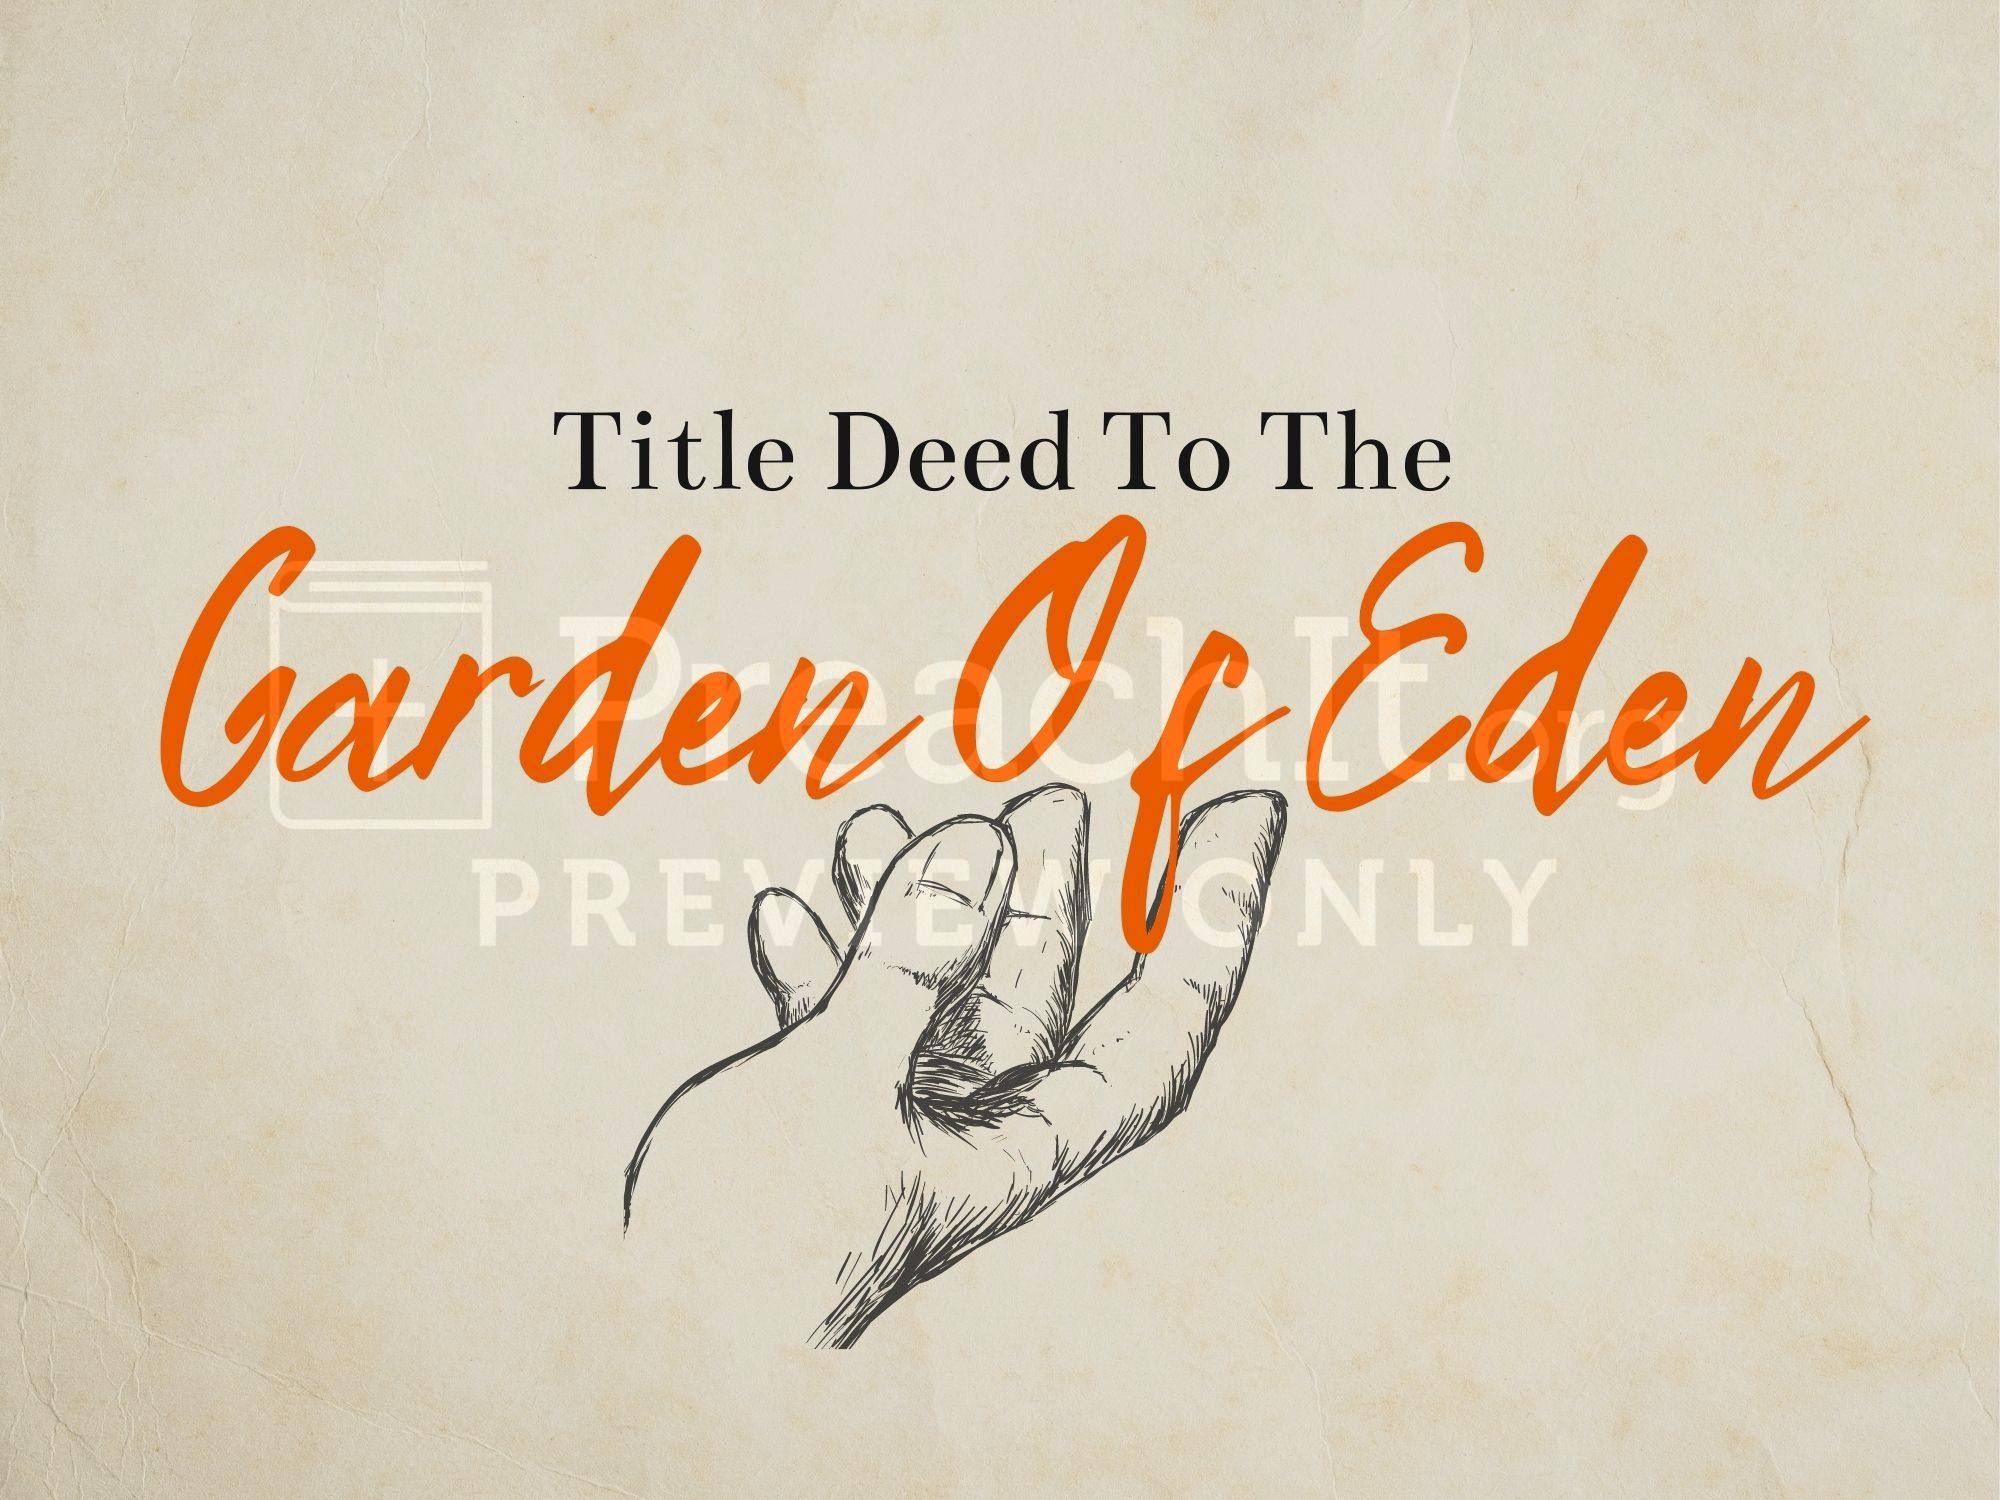 Lesson 2: Title Deed to the Garden of Eden